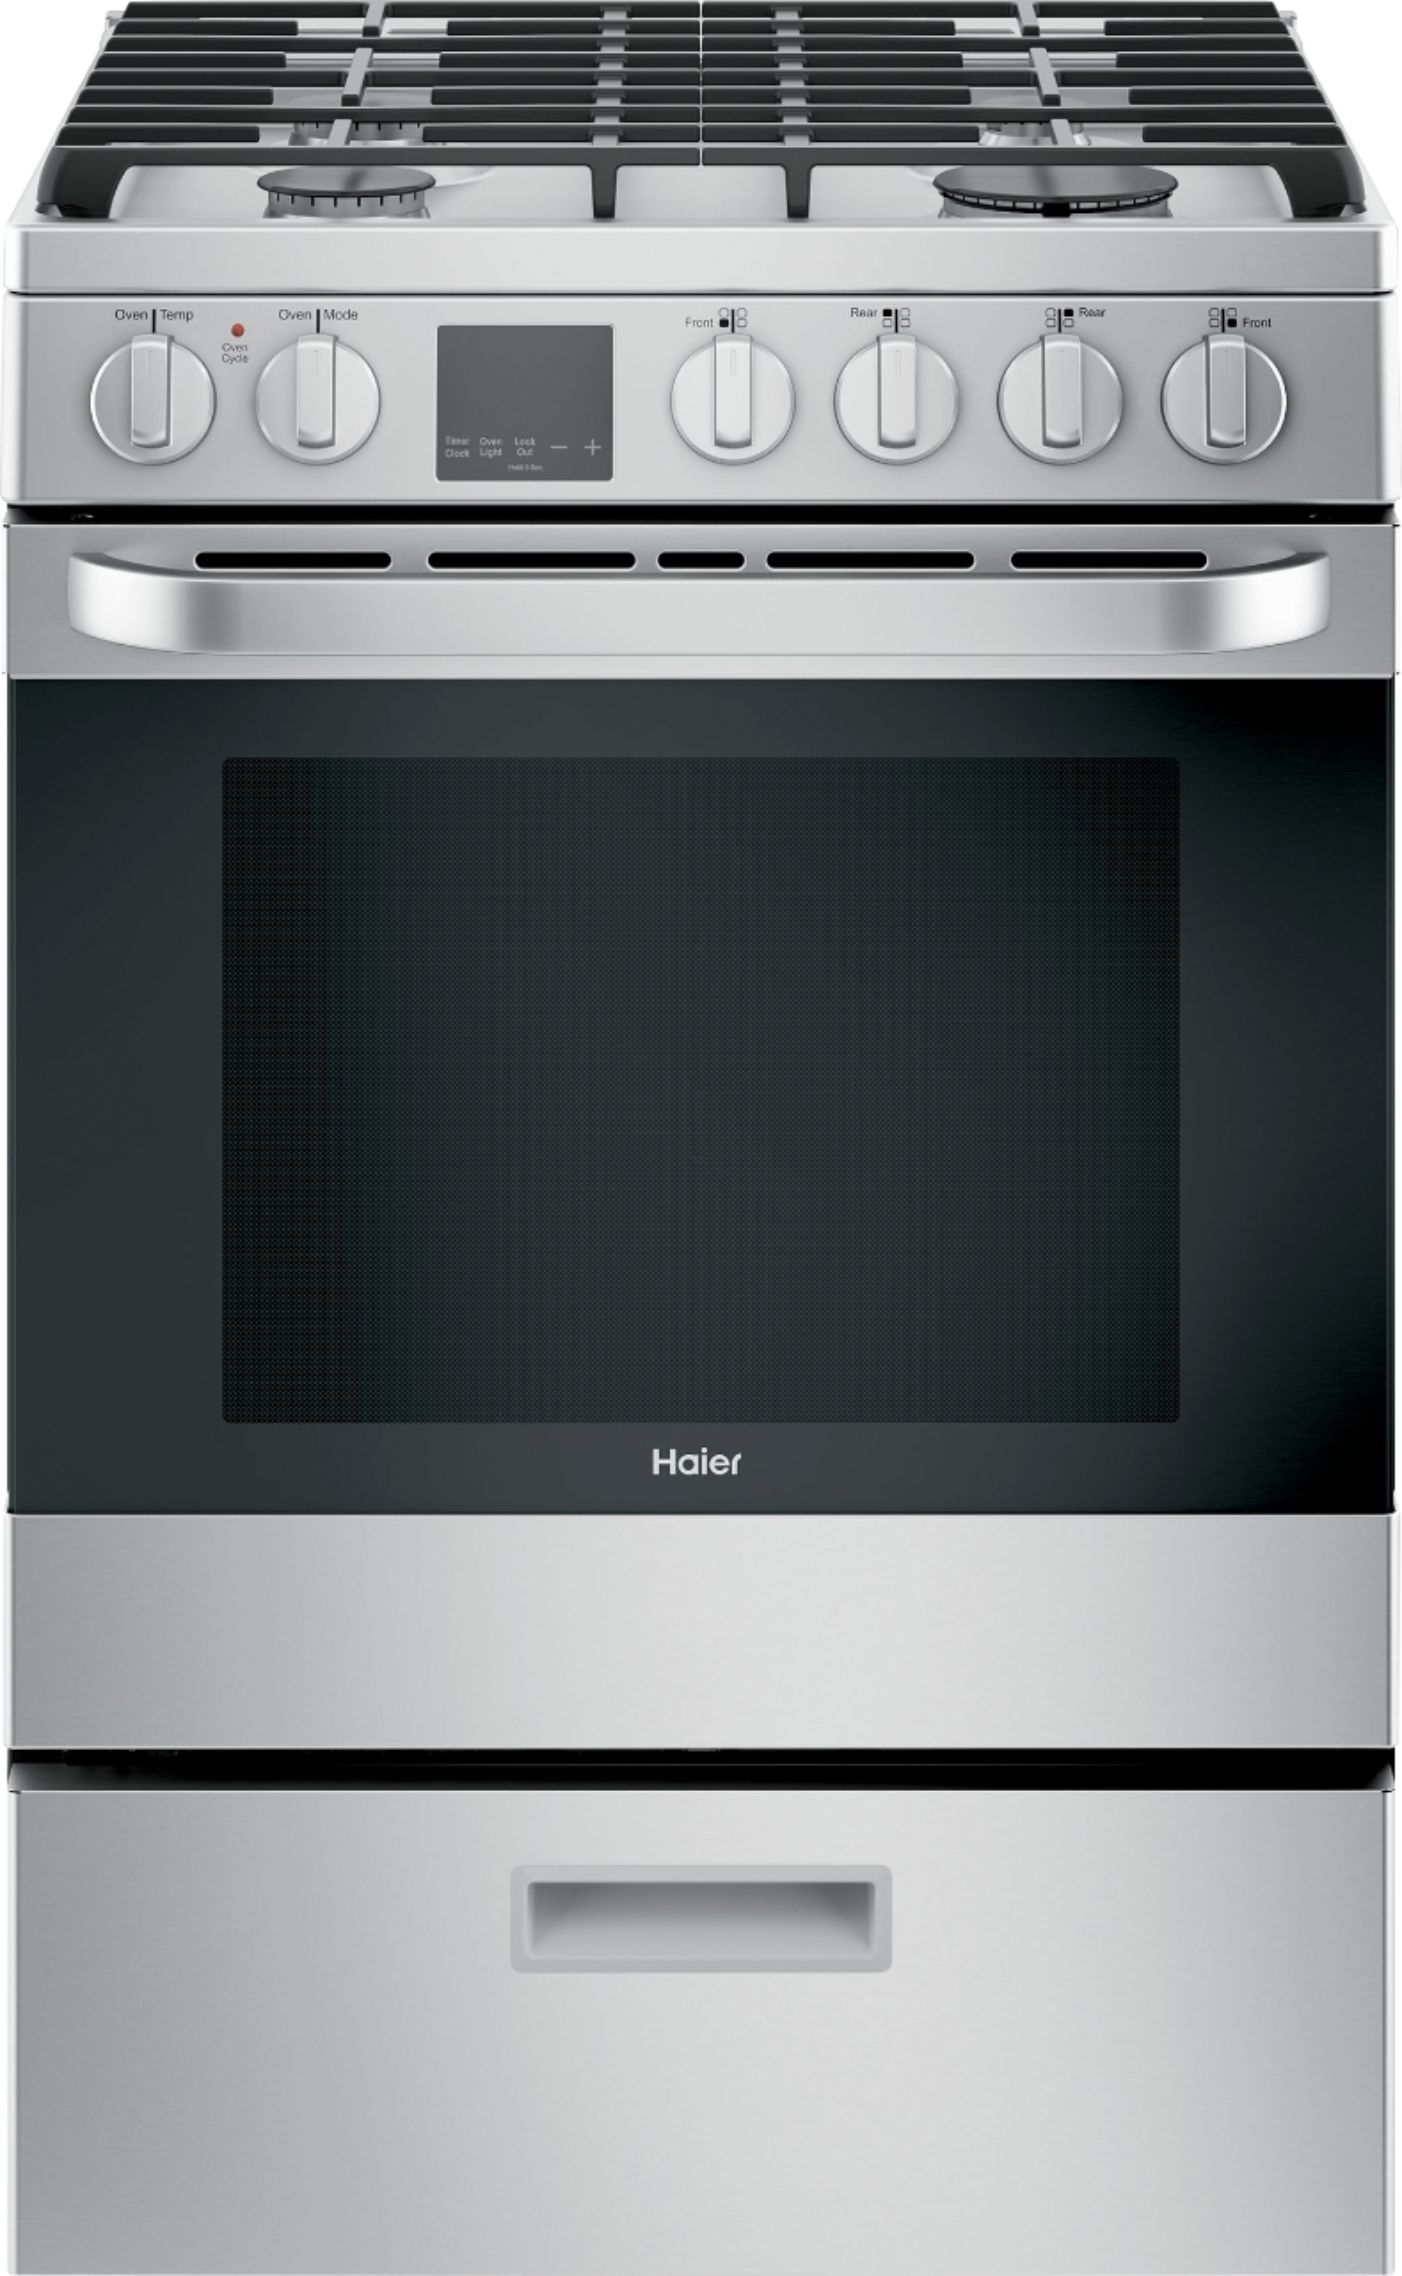 Haier 2.9 Cu. Ft. Freestanding Gas Convection Range Stainless steel at Pacific Sales